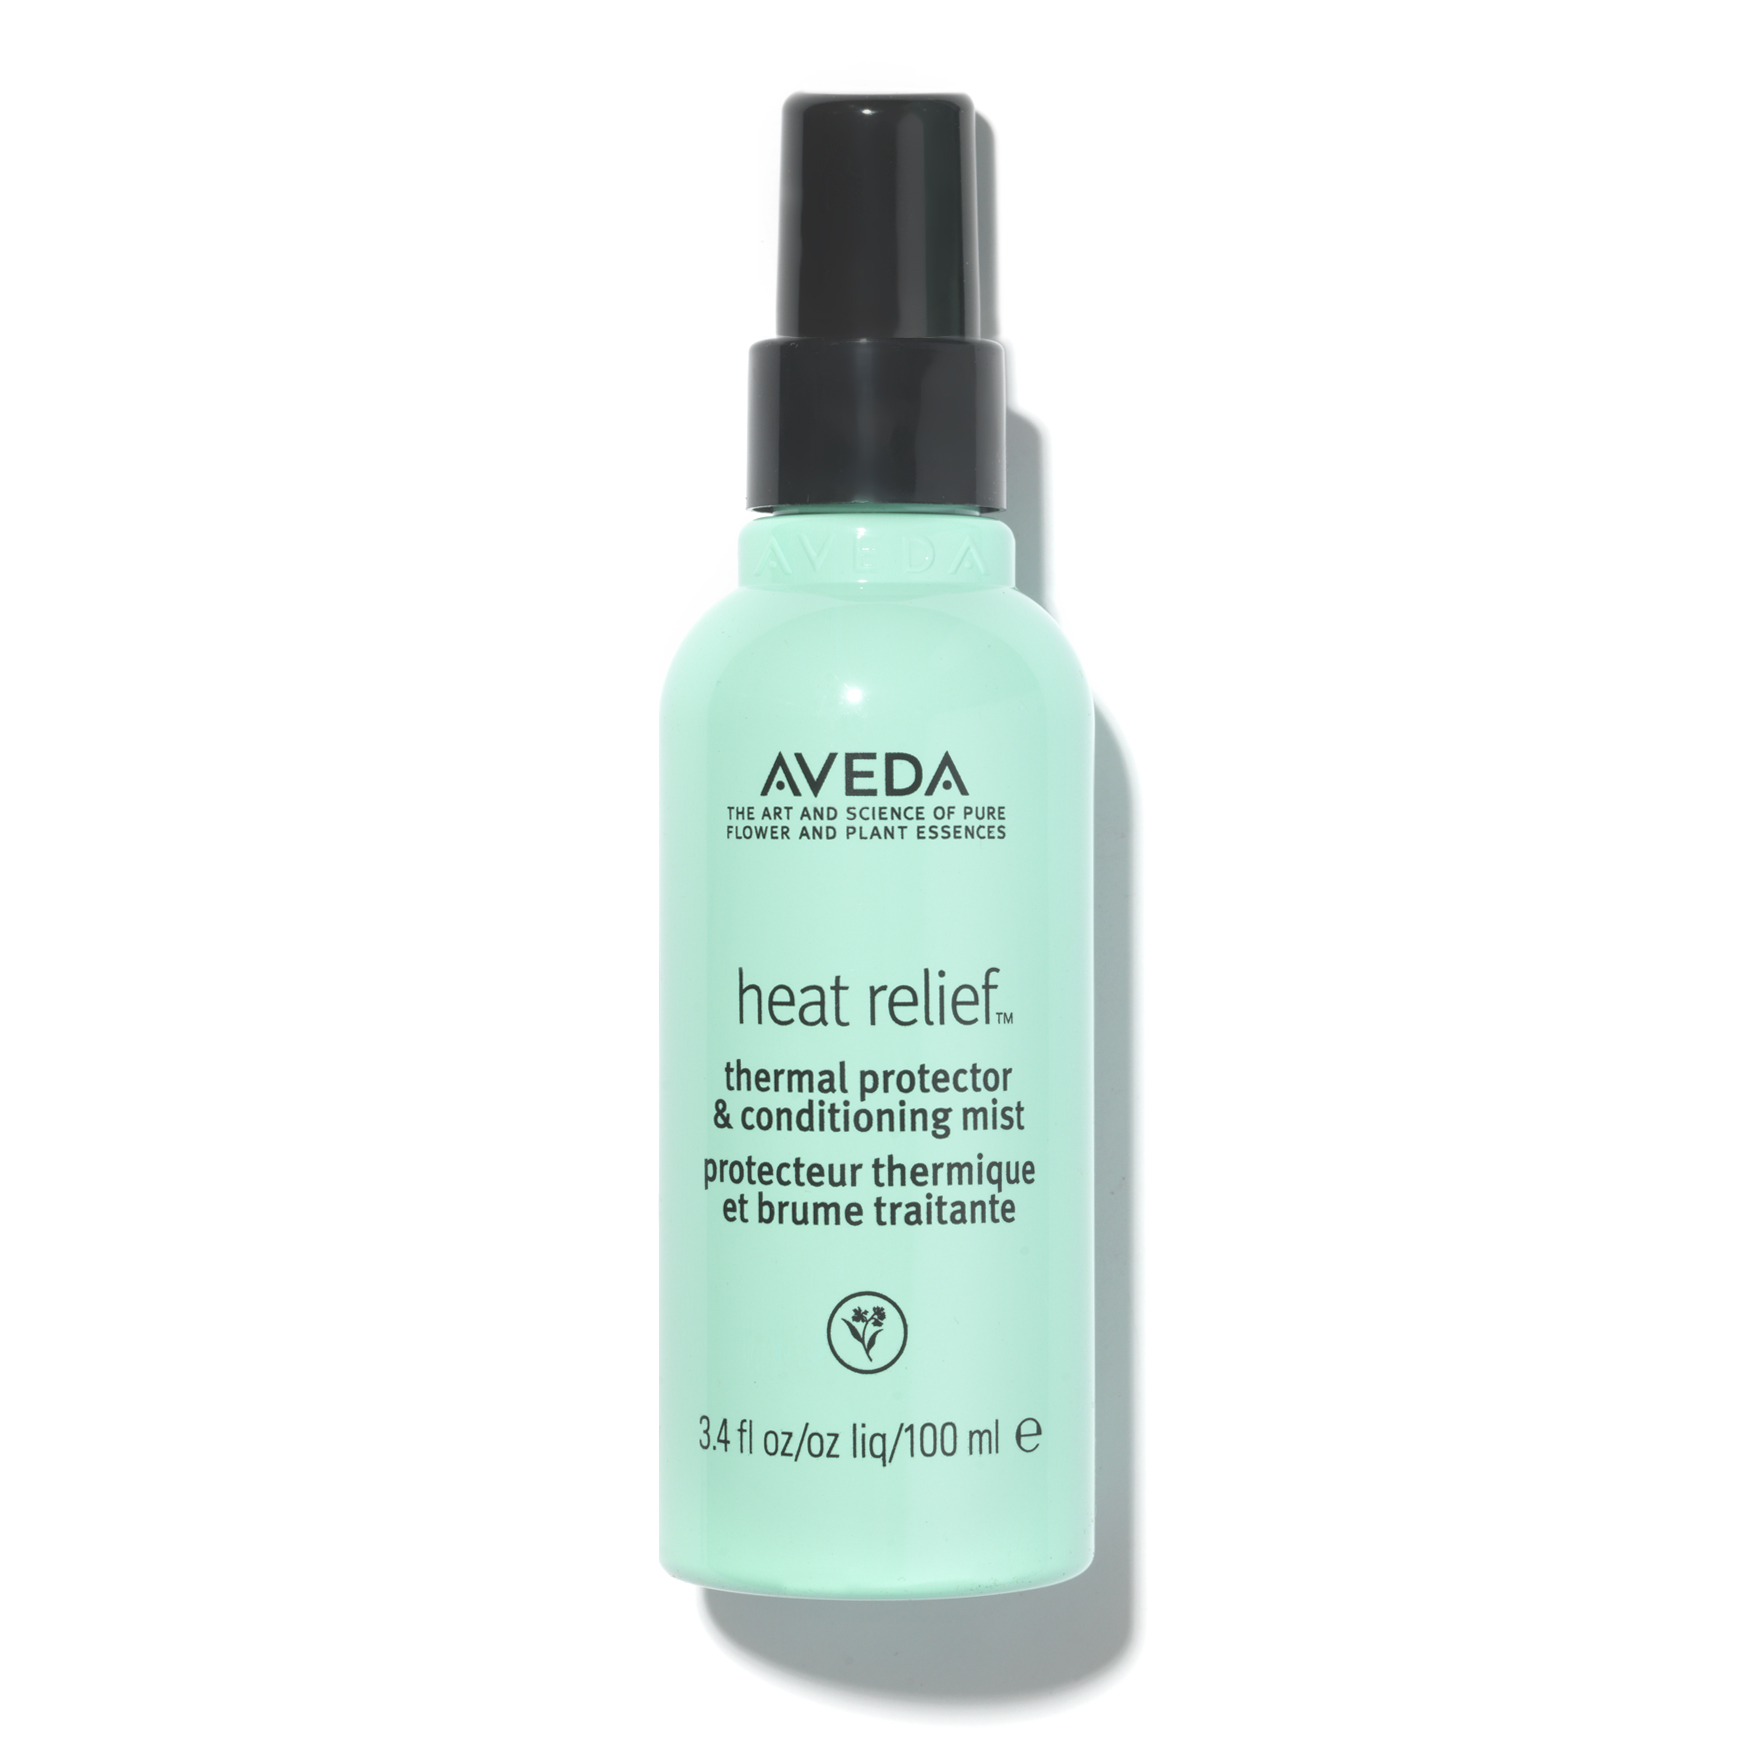 Aveda Heat Relief Thermal Protector and Conditioning Mist | Space NK